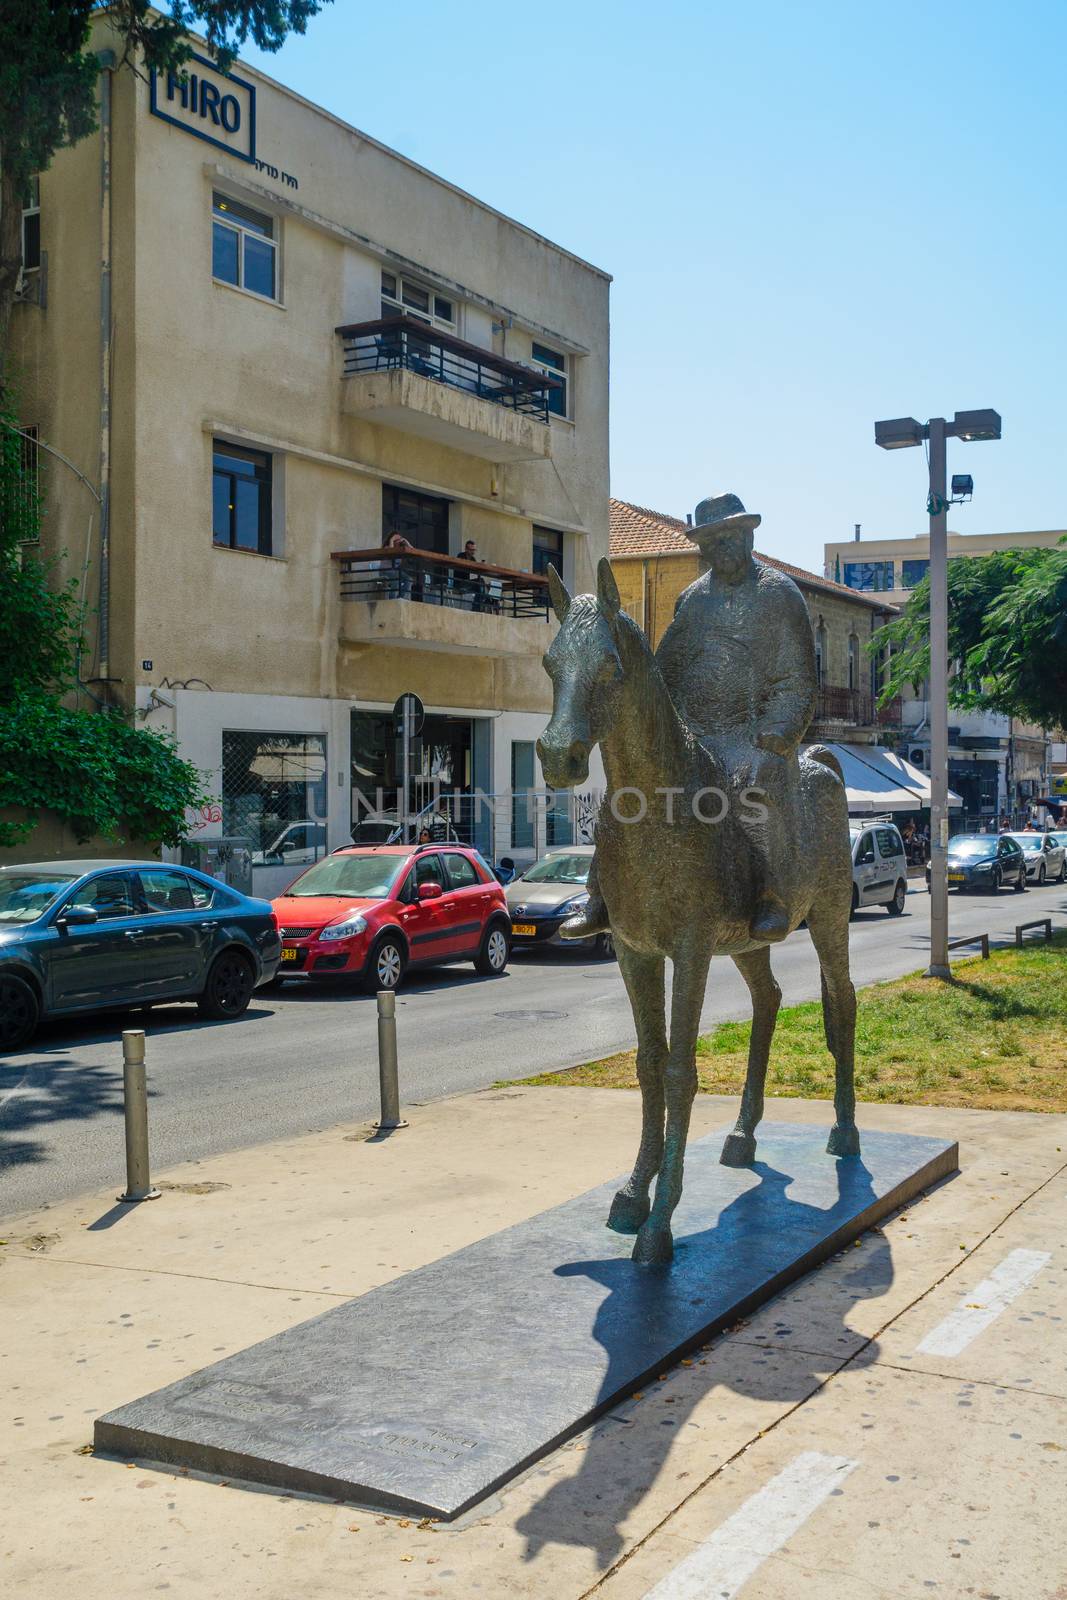 TEL-AVIV, ISRAEL - AUGUST 31, 2016: Street scene of the Rothschild Boulevard, with Meir Dizengoff (the first mayor) Statue, local businesses, locals and visitors. In Tel-Aviv, Israel